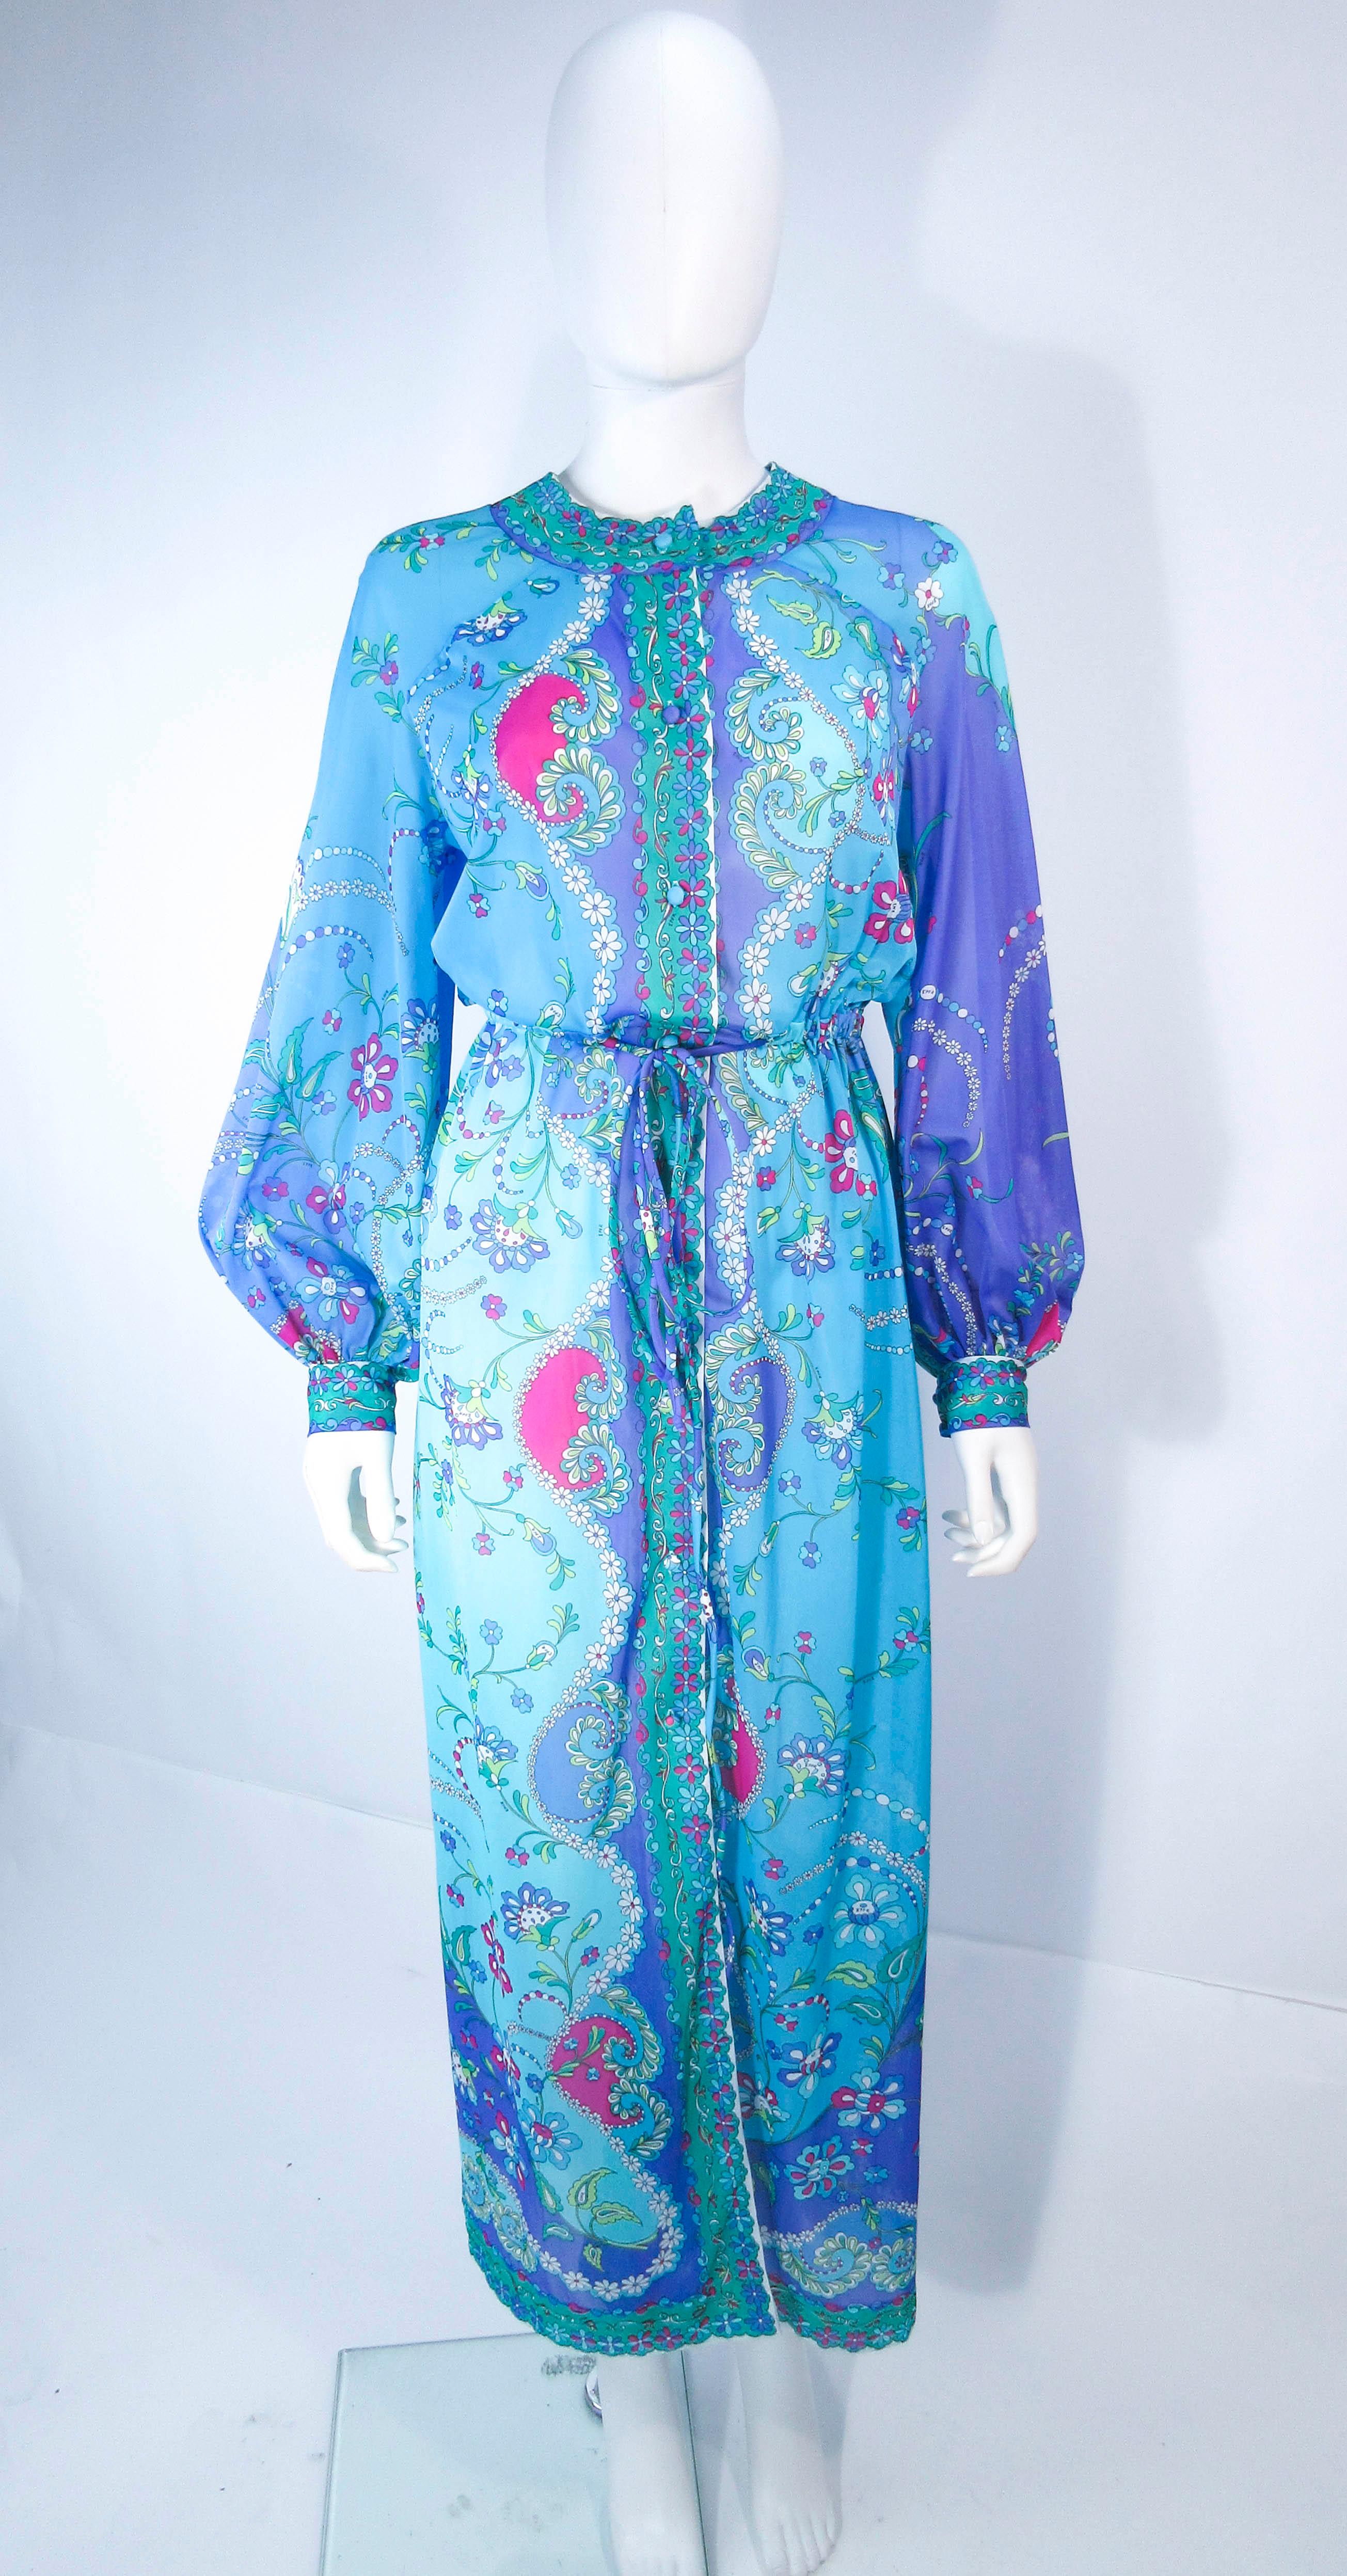 This Pucci dress is composed of a jersey knit polyester with a wonderful bold abstract print. Features a high neckline with billow sleeves, center front closures, and tie . In excellent vintage condition (light signs of wear due to age, see photos,